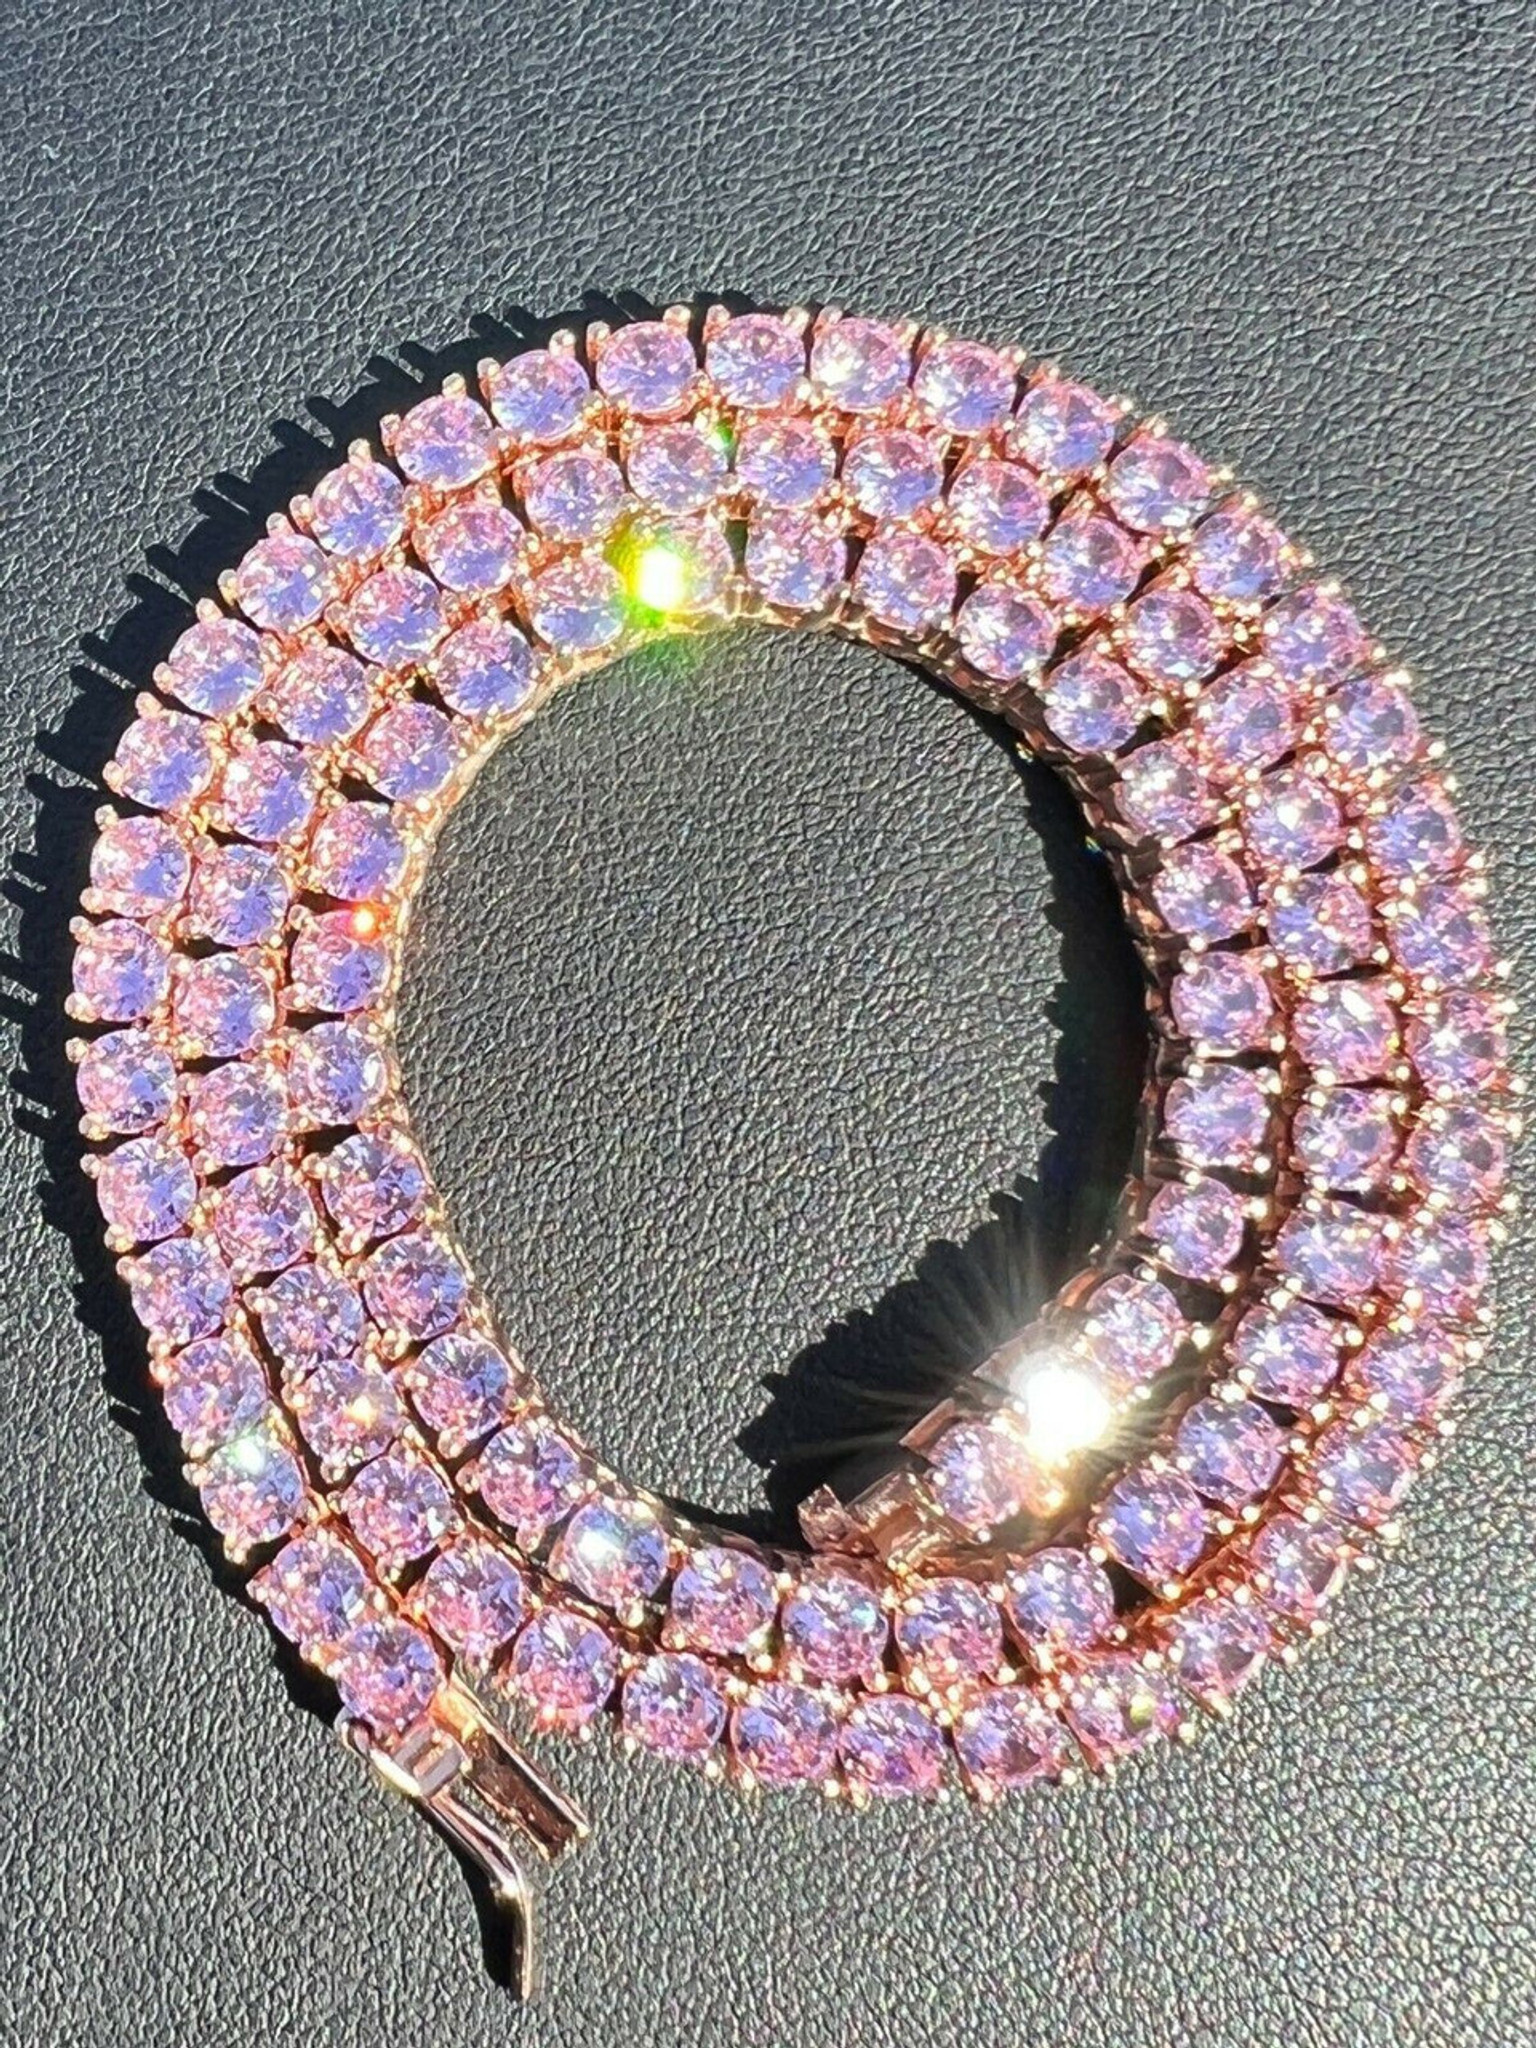 4mm Tennis Chain Real 925 Sterling Silver 14k Rose Gold Pink